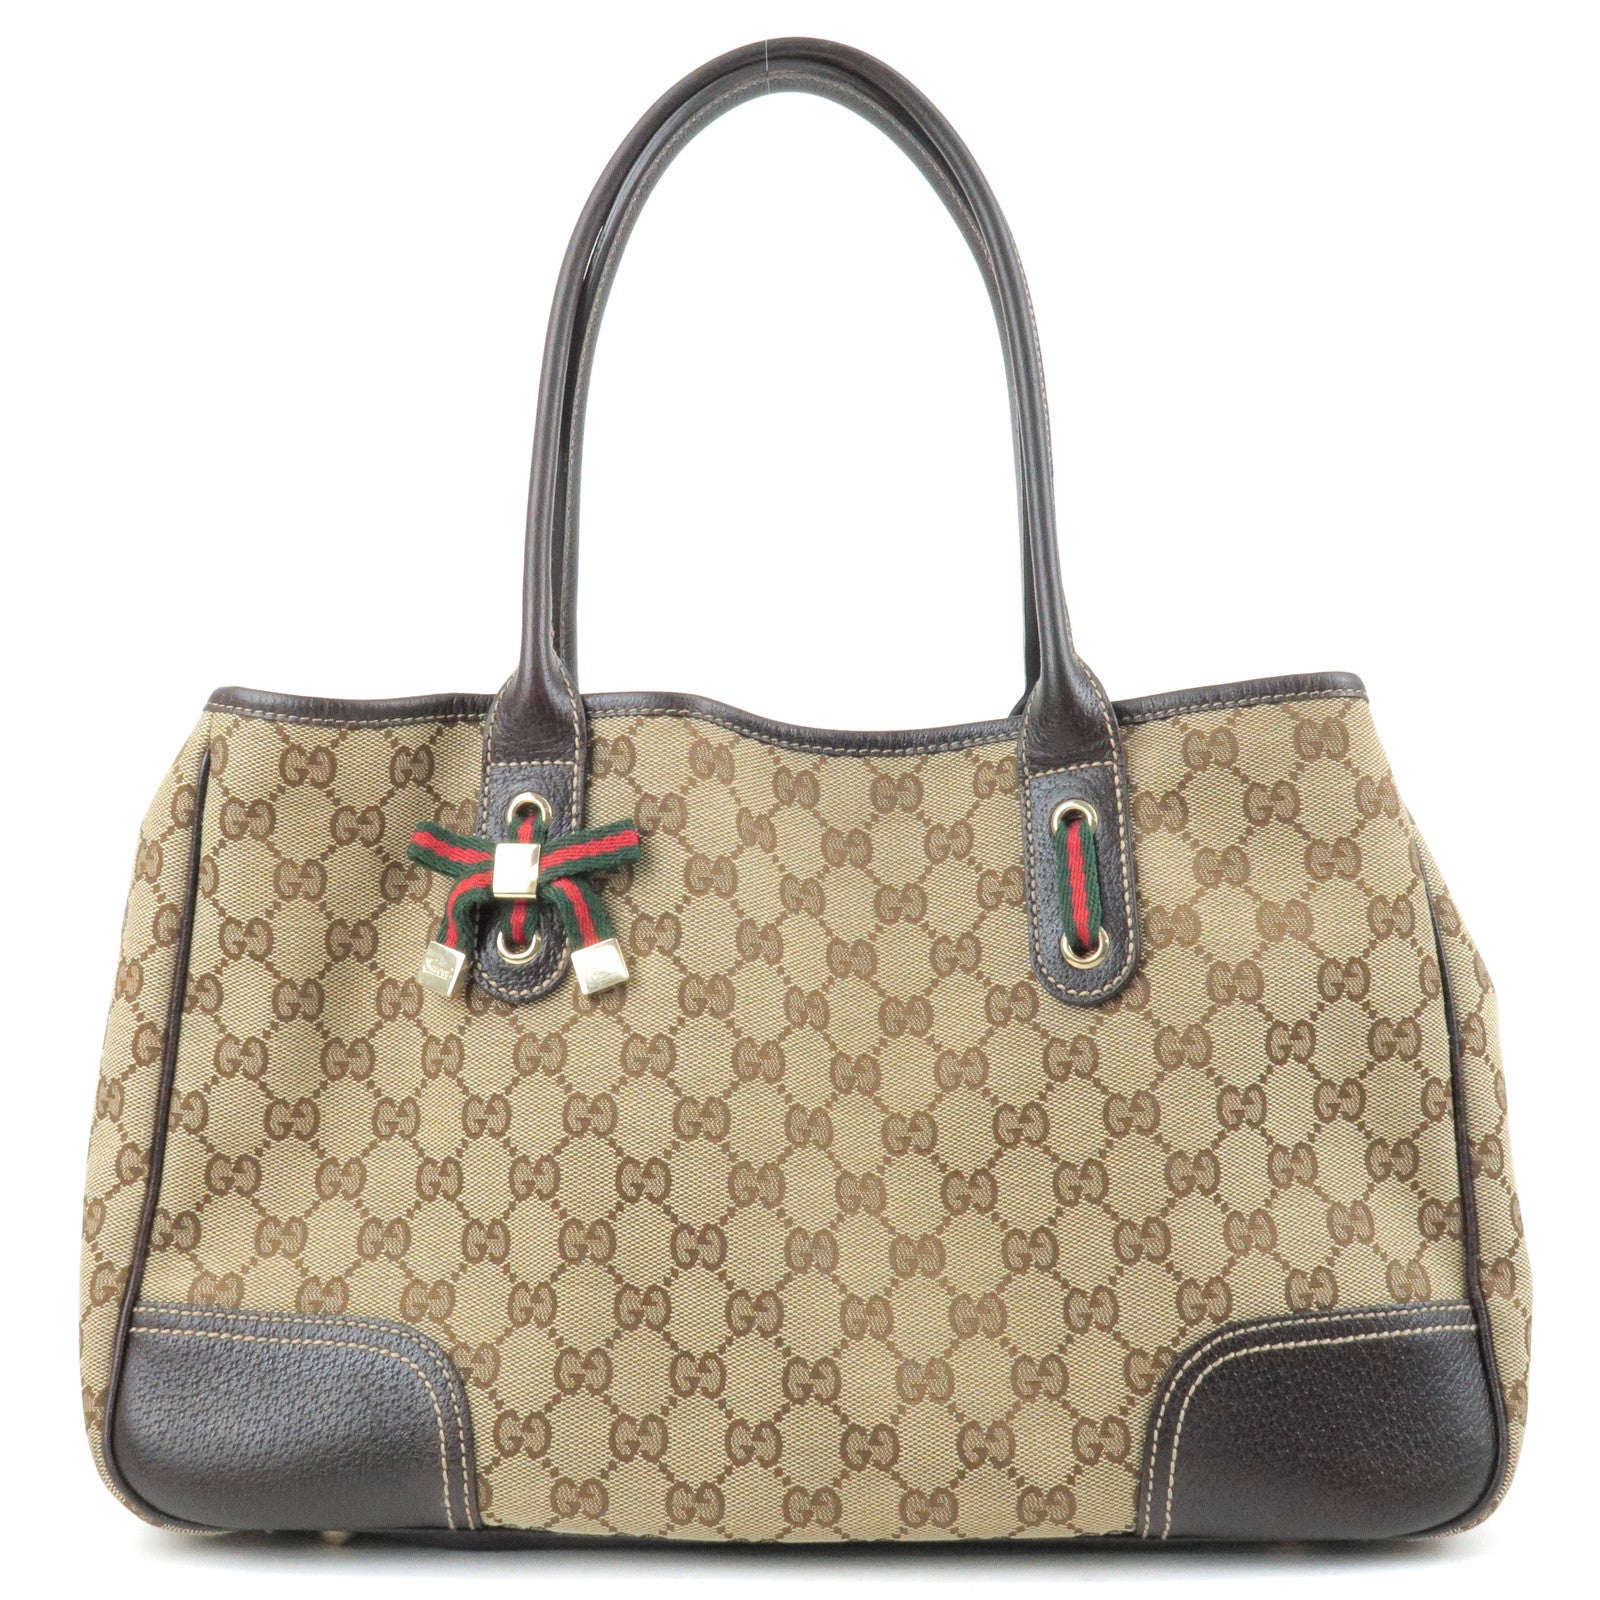 GUCCI-Gucci-Princy-Sherry-GG-Canvas-Leather-Tote-Bag-Beige-163805